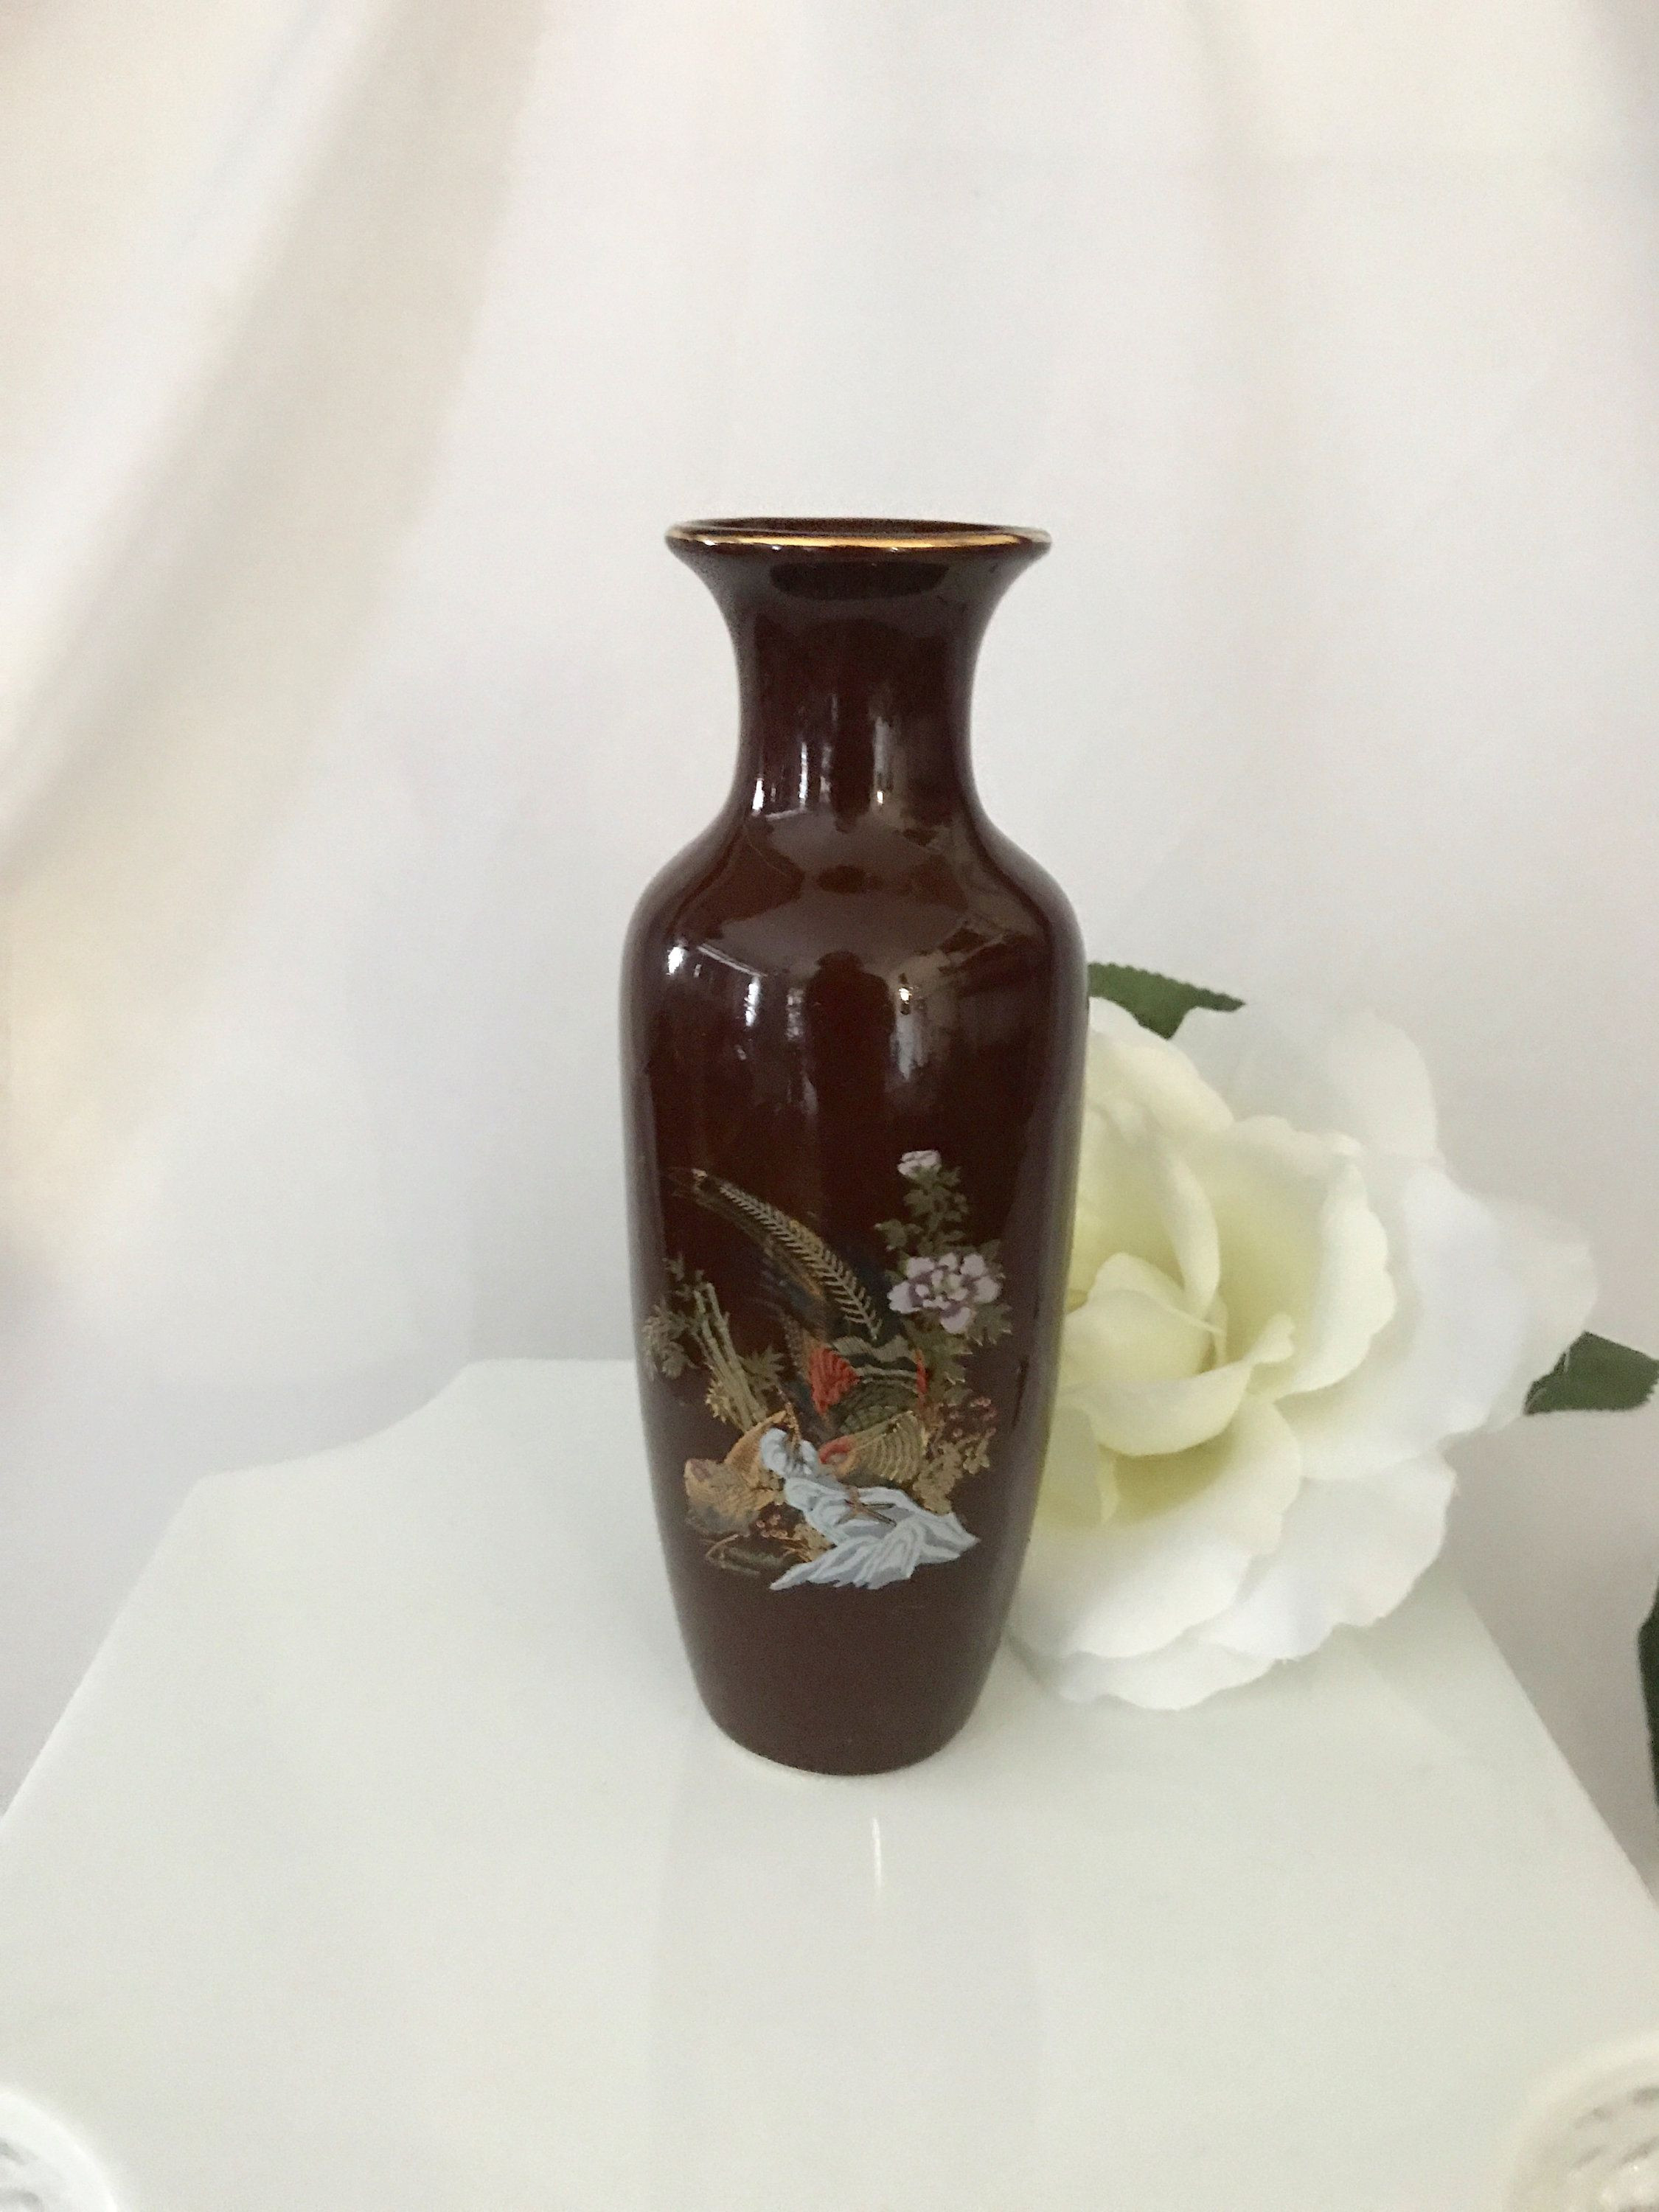 27 attractive Floral Vases for Sale 2024 free download floral vases for sale of ceramic vase japanese ceramic porcelain hand painted florals and for on sale ceramic vase japanese ceramic porcelain hand painted florals and birds